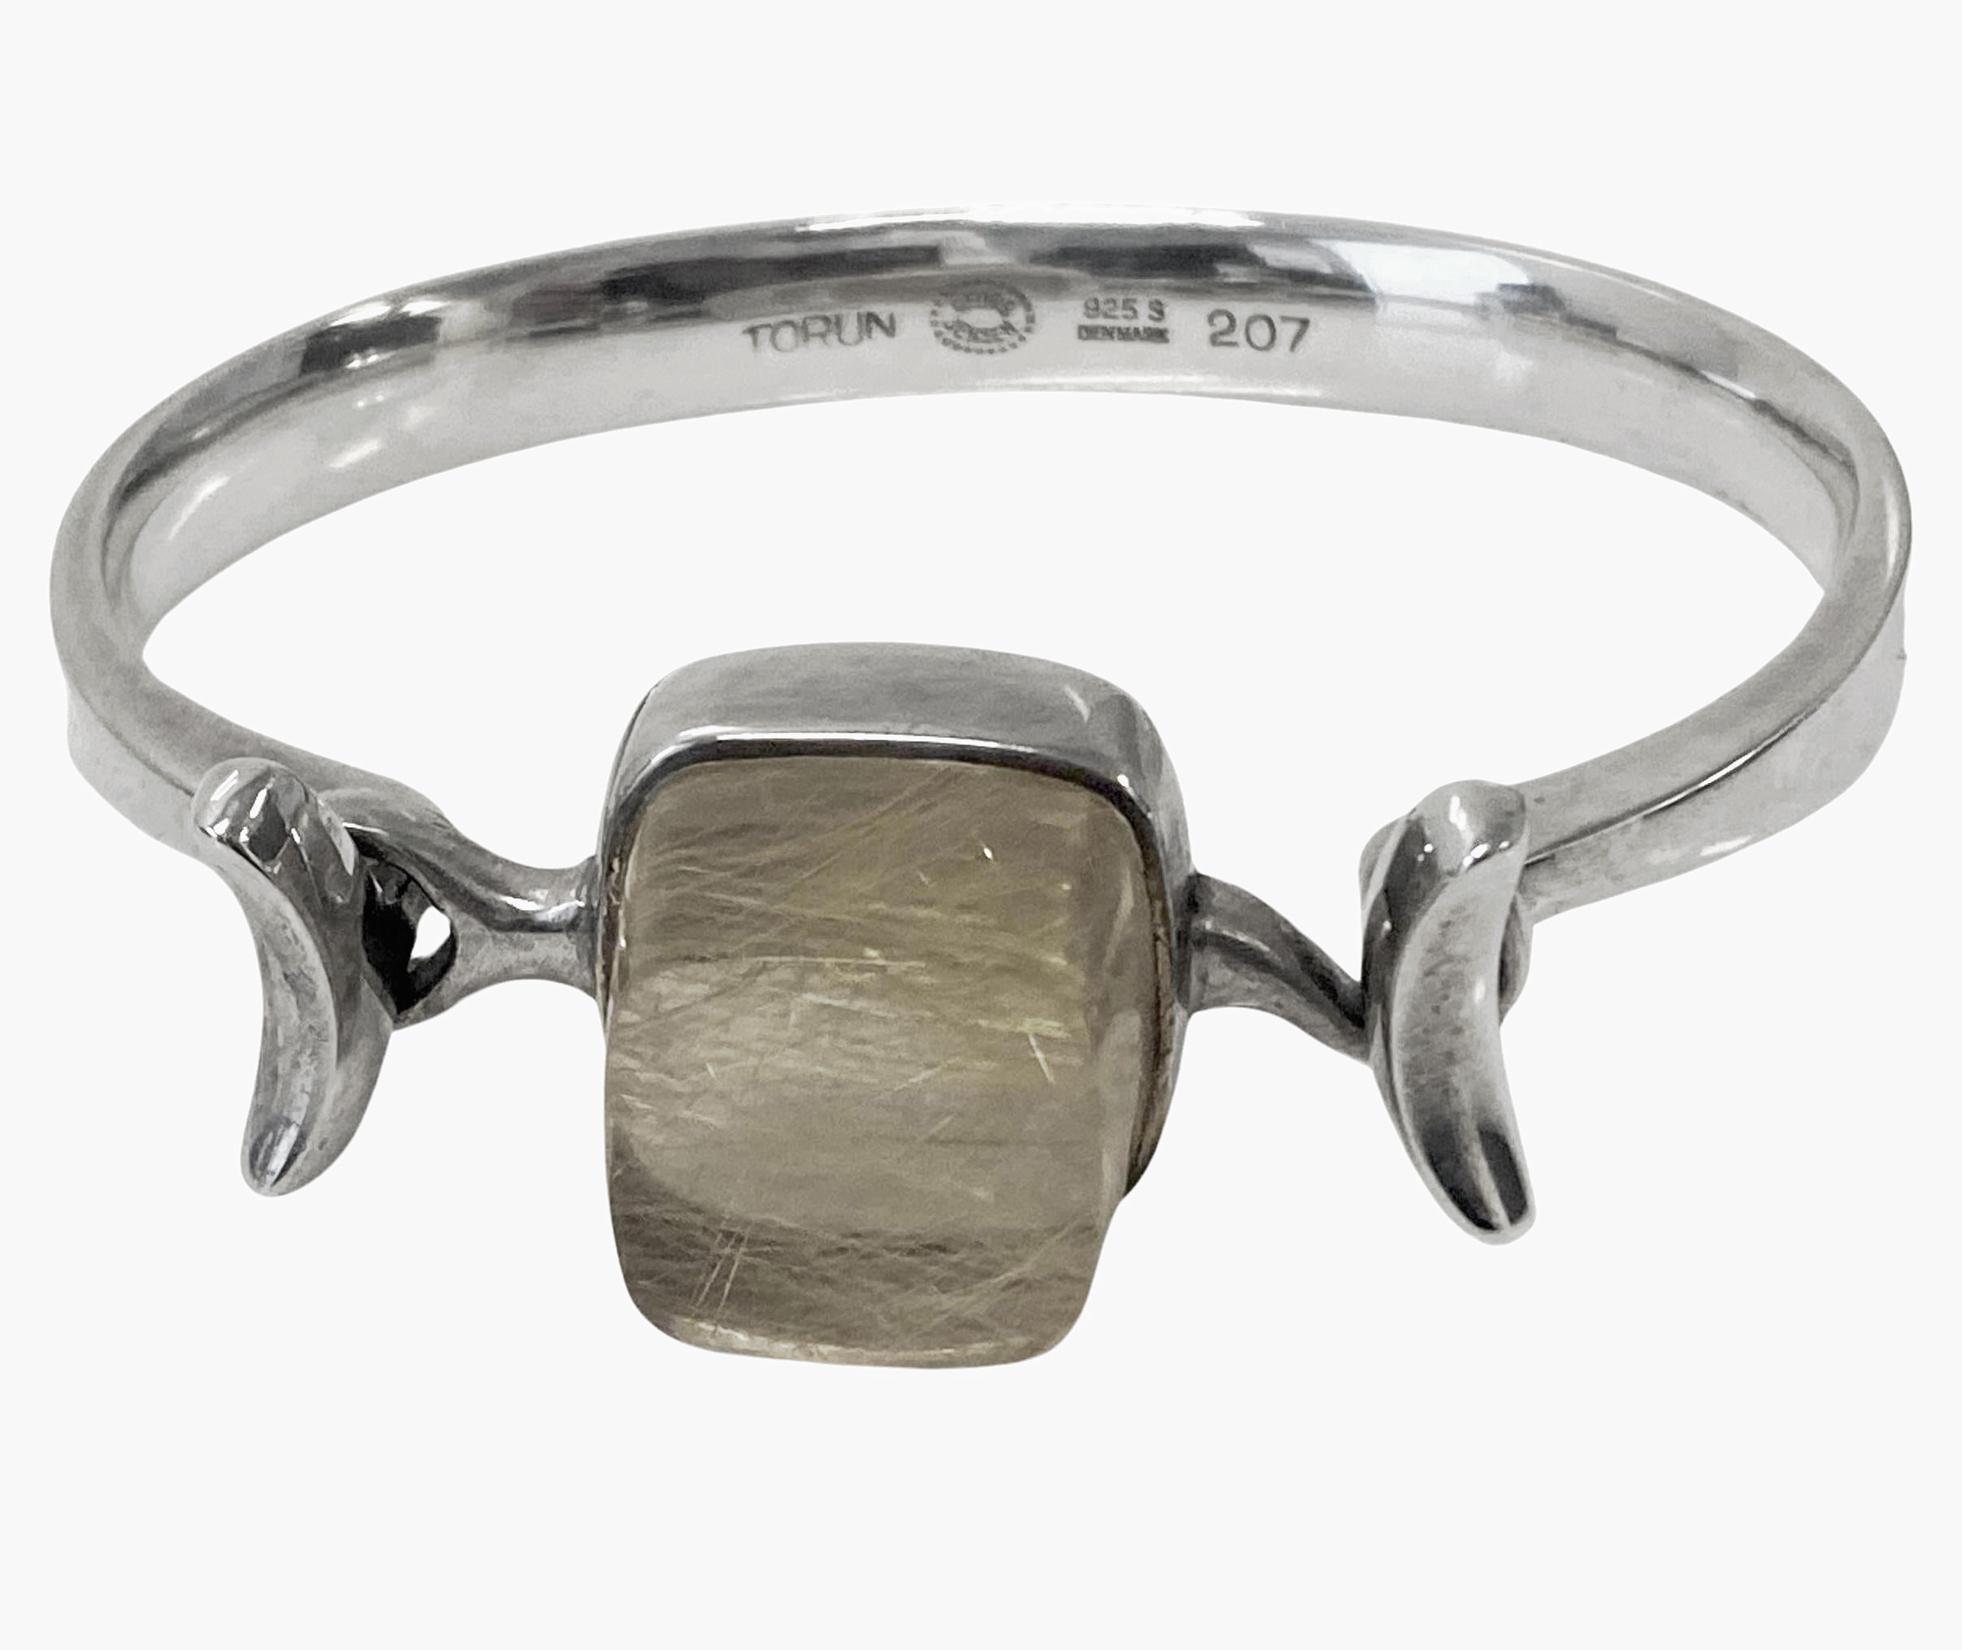 Georg Jensen Bangle rutilated quartz # 207. Designed by Vivianna Torun Bülow-Hübe C.1967. Sterling Silver rare design. Fits wrists up to 7 inches, tension clamp opening. Approximate dimensions: bangle circumference inside: 17.00 cm (6.7 inches)